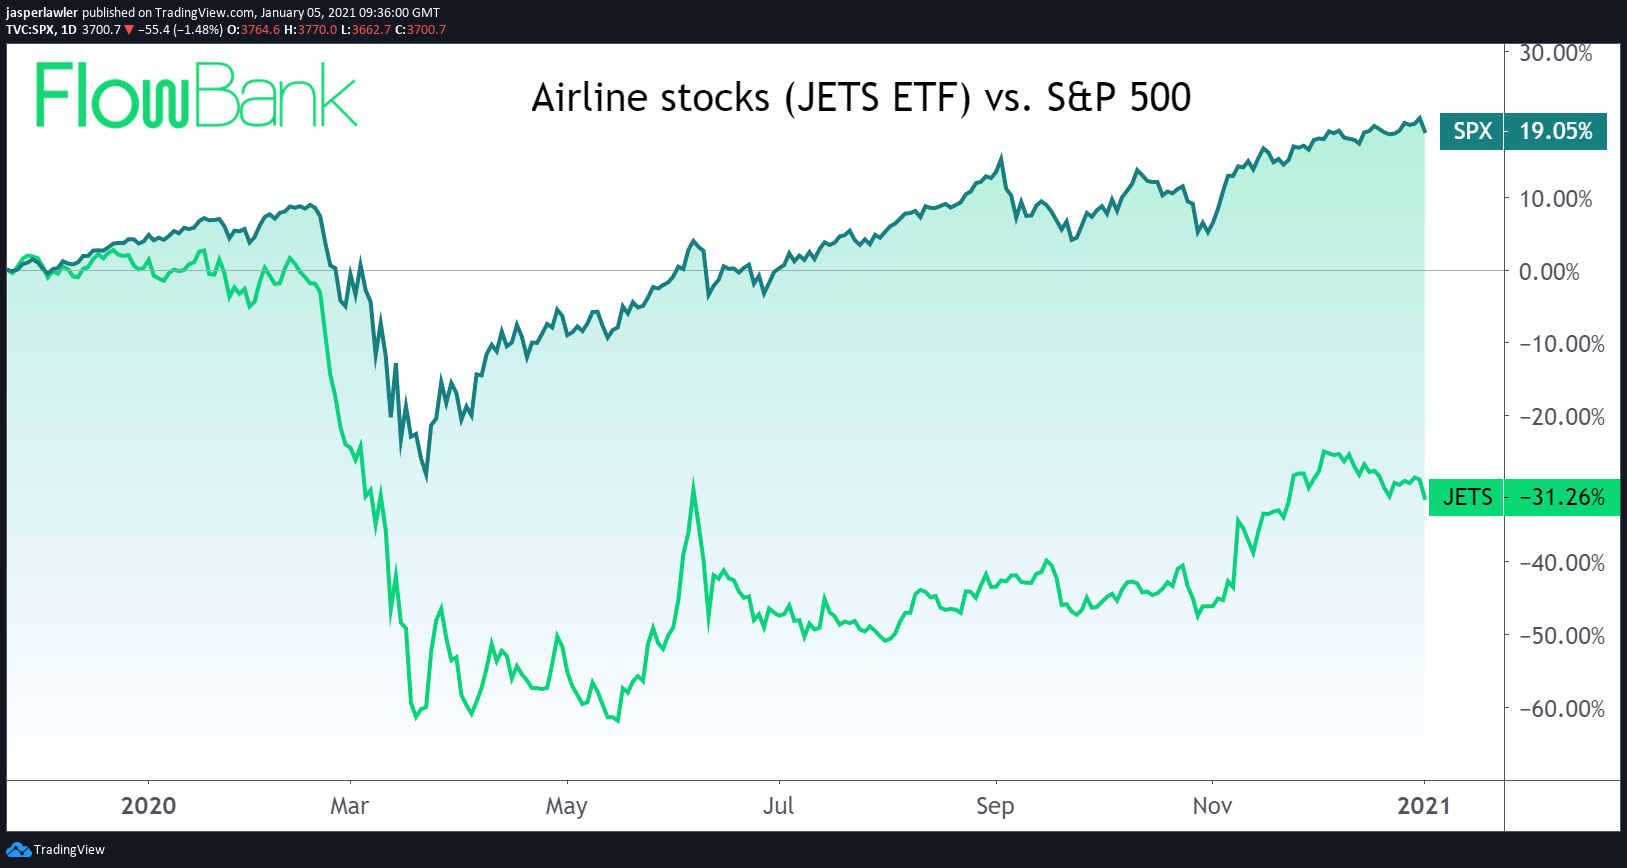 The JETS ETF shows there's a long way to go for airline stocks to catch-up